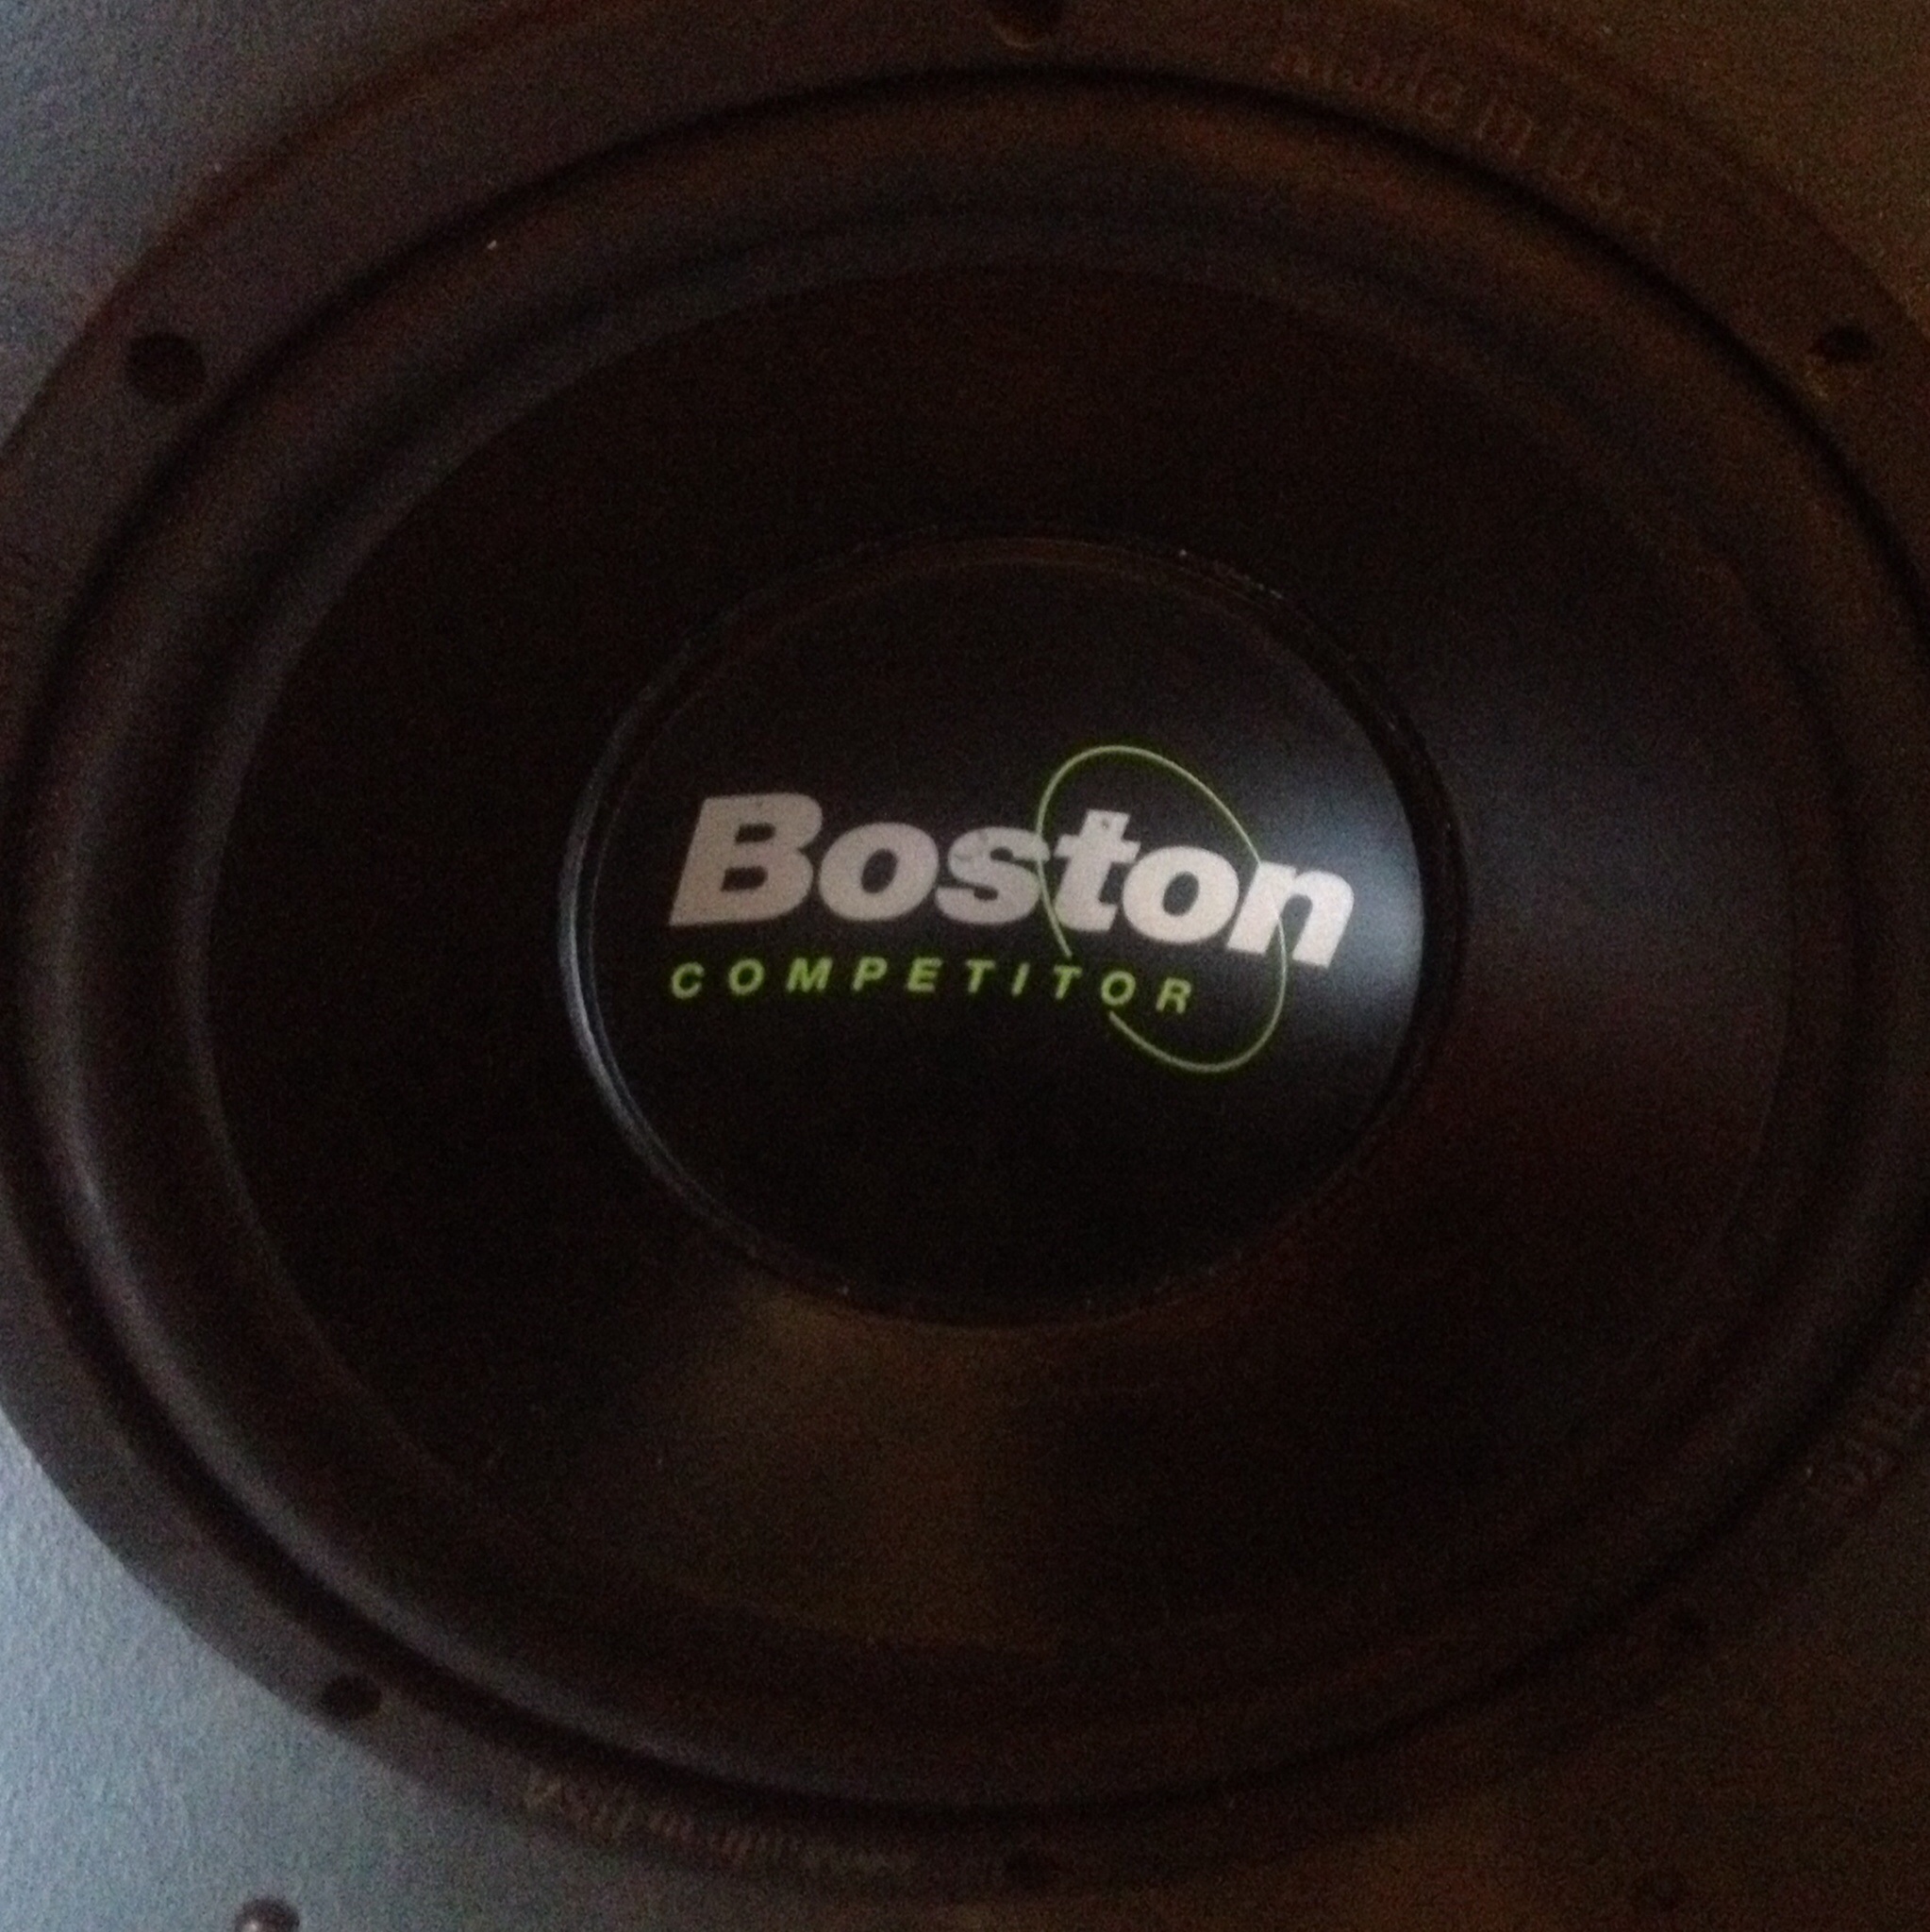 Boston competitor 10\" subwoofer in box..